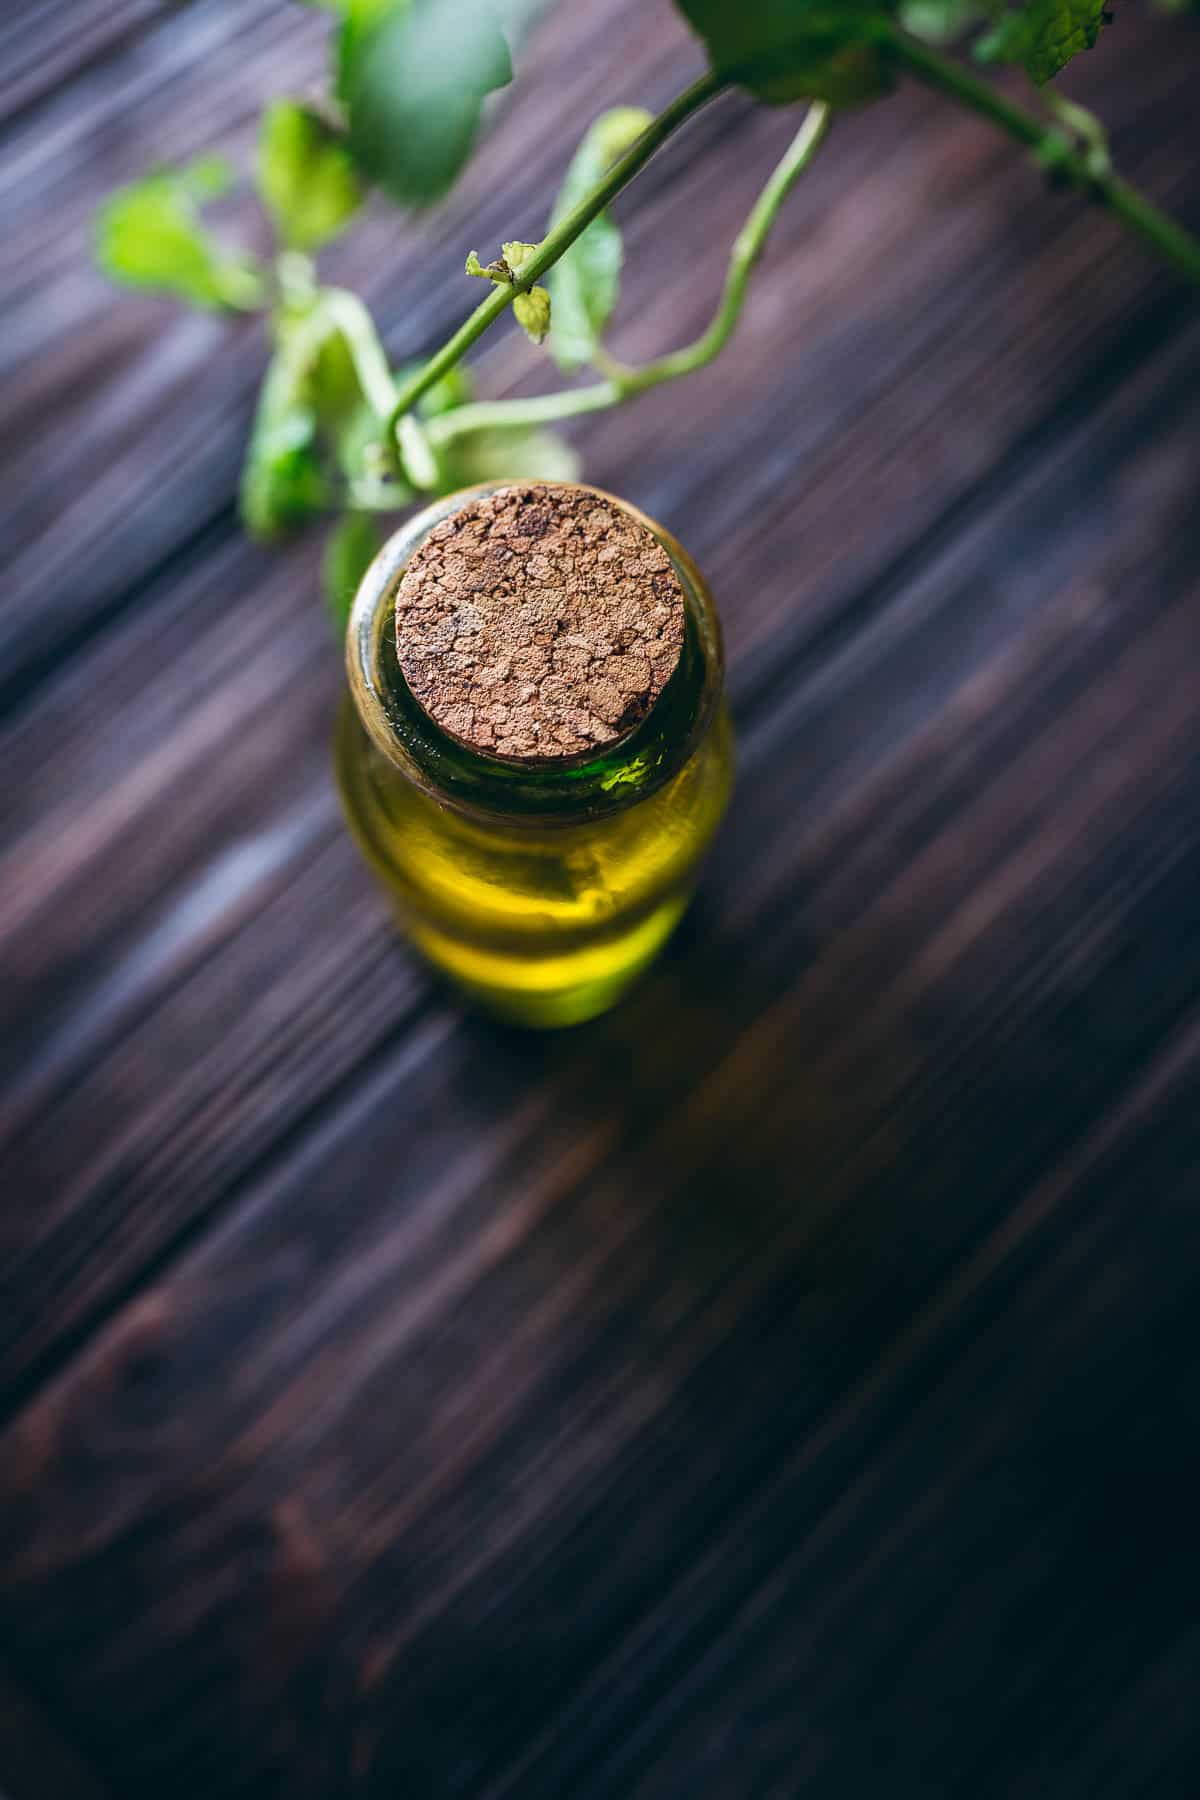 Top view of a corked glass bottle filled with golden liquid.